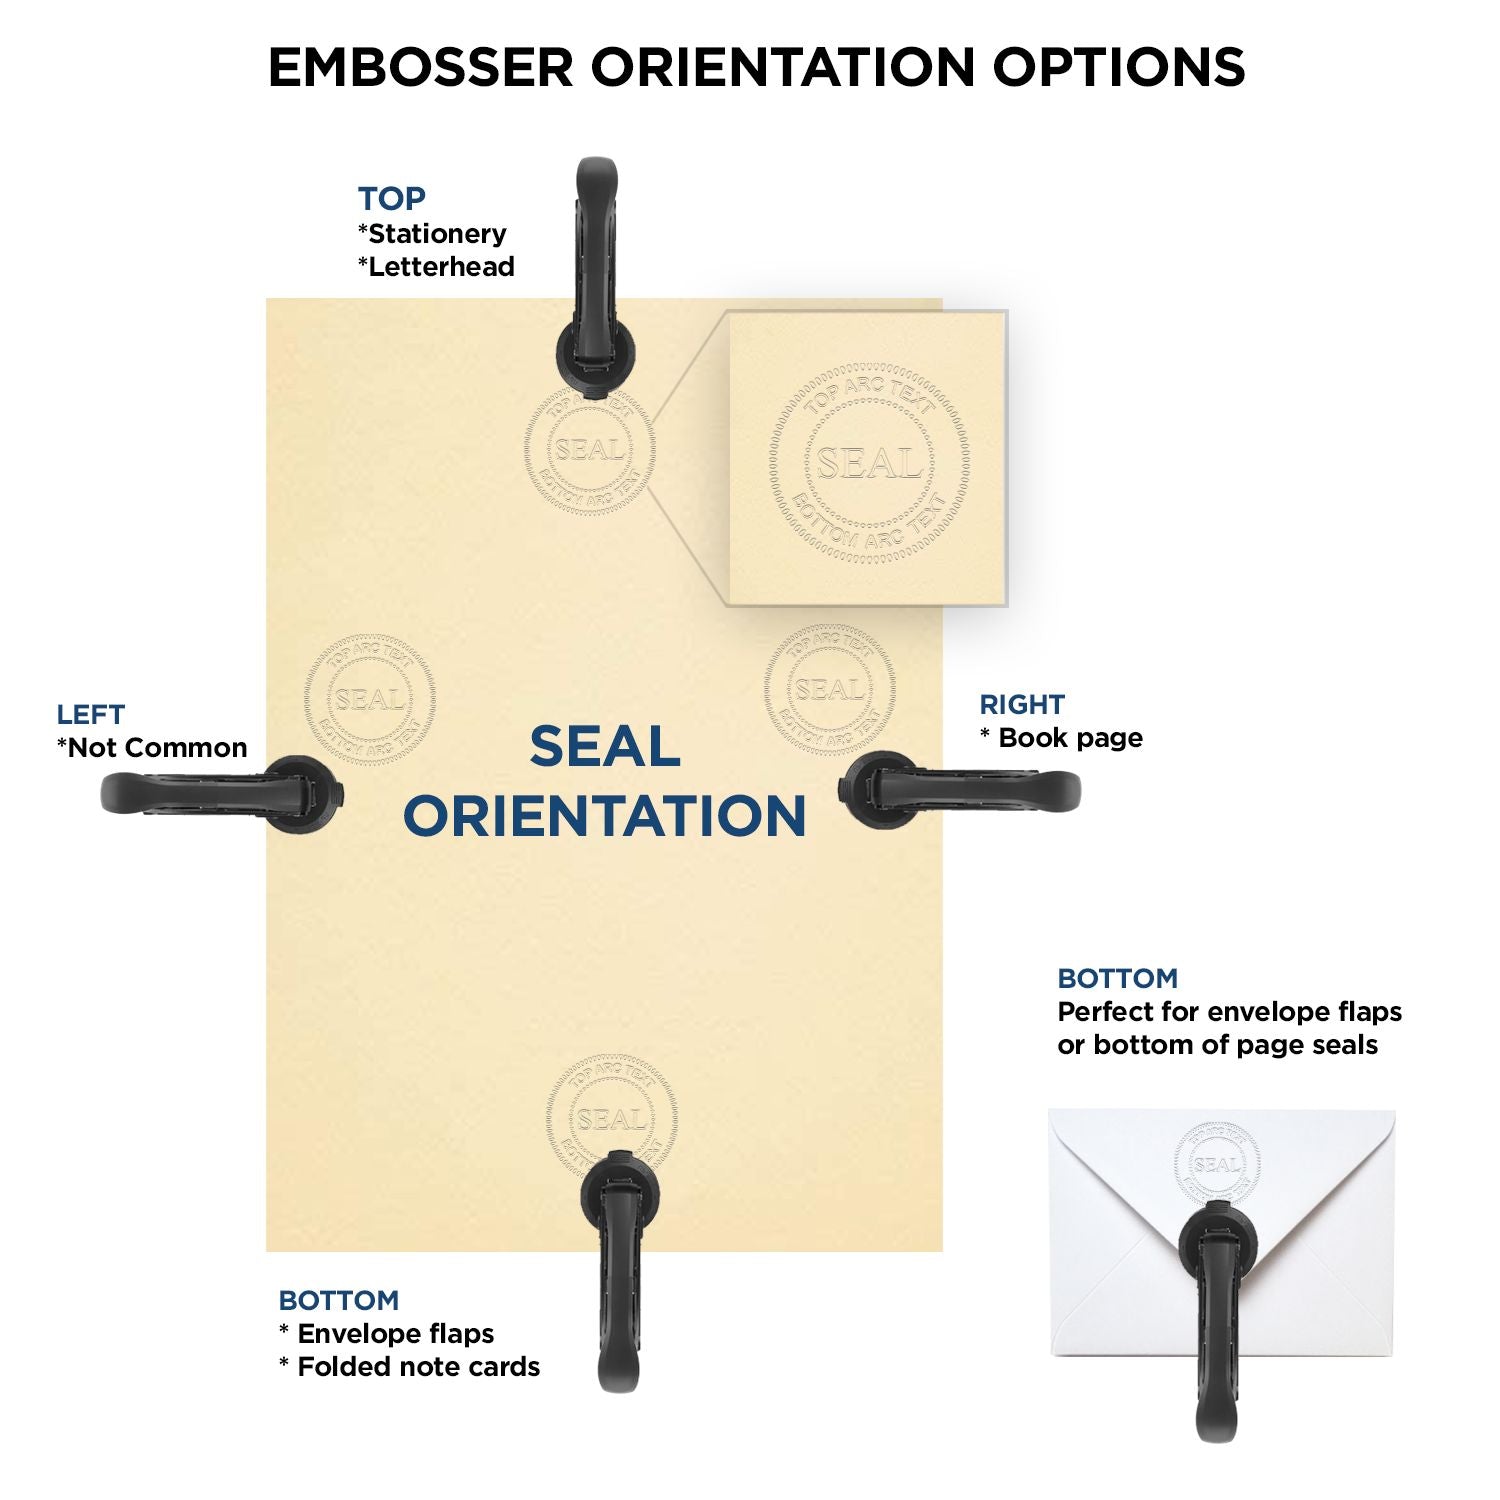 An infographic for the Extended Long Reach New York Surveyor Embosser showing embosser orientation, this is showing examples of a top, bottom, right and left insert.